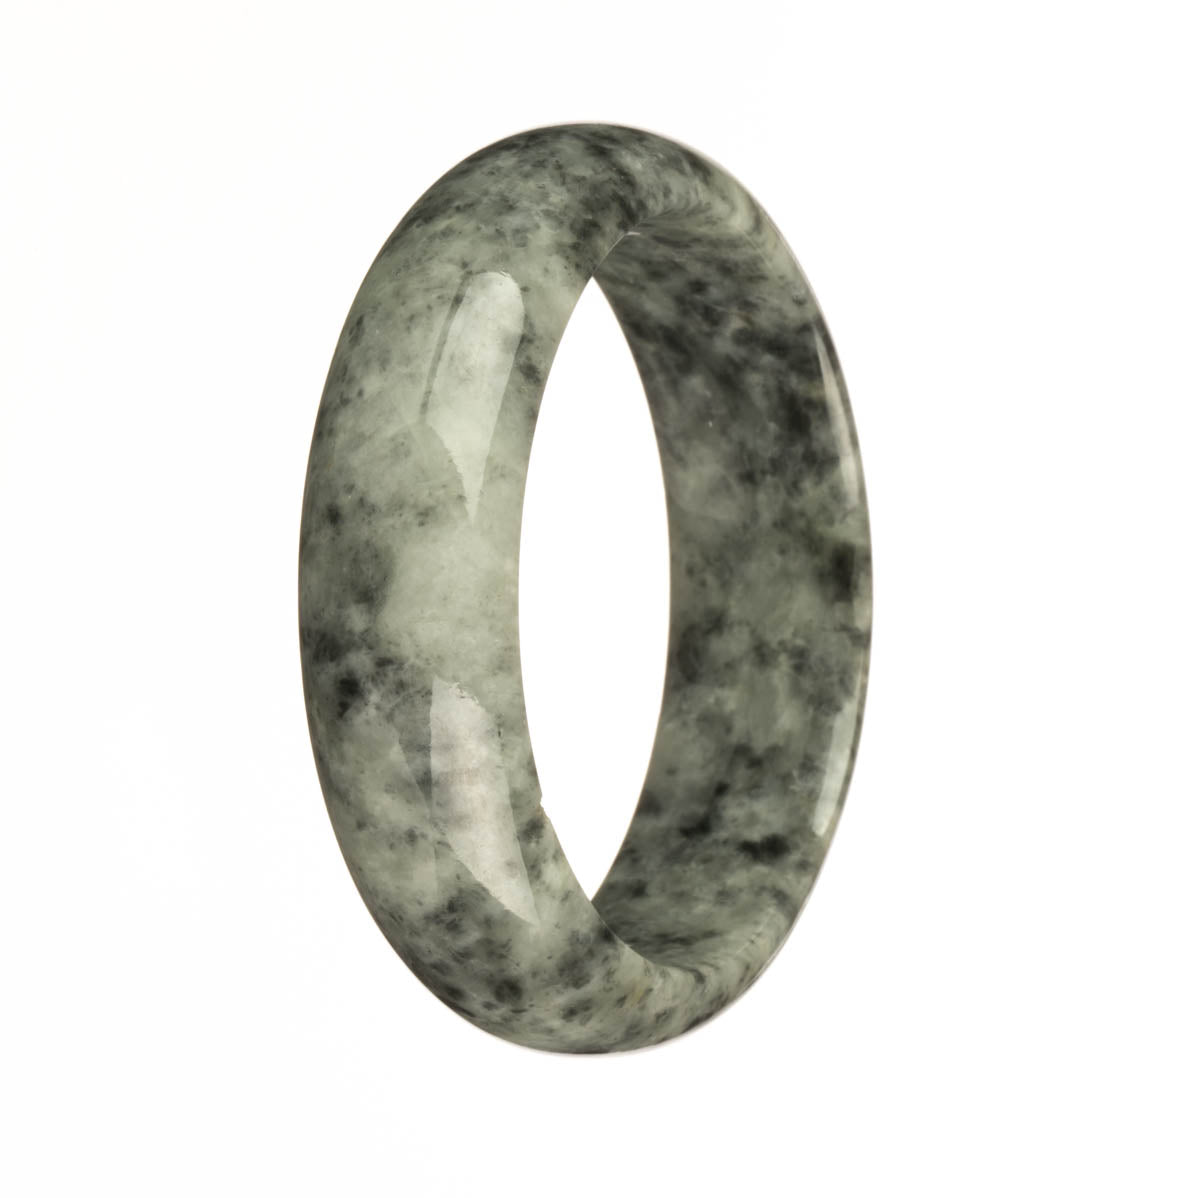 A close-up image of a beautiful grey patterned Burmese jade bracelet with a half moon shape, showcasing its genuine, natural beauty.